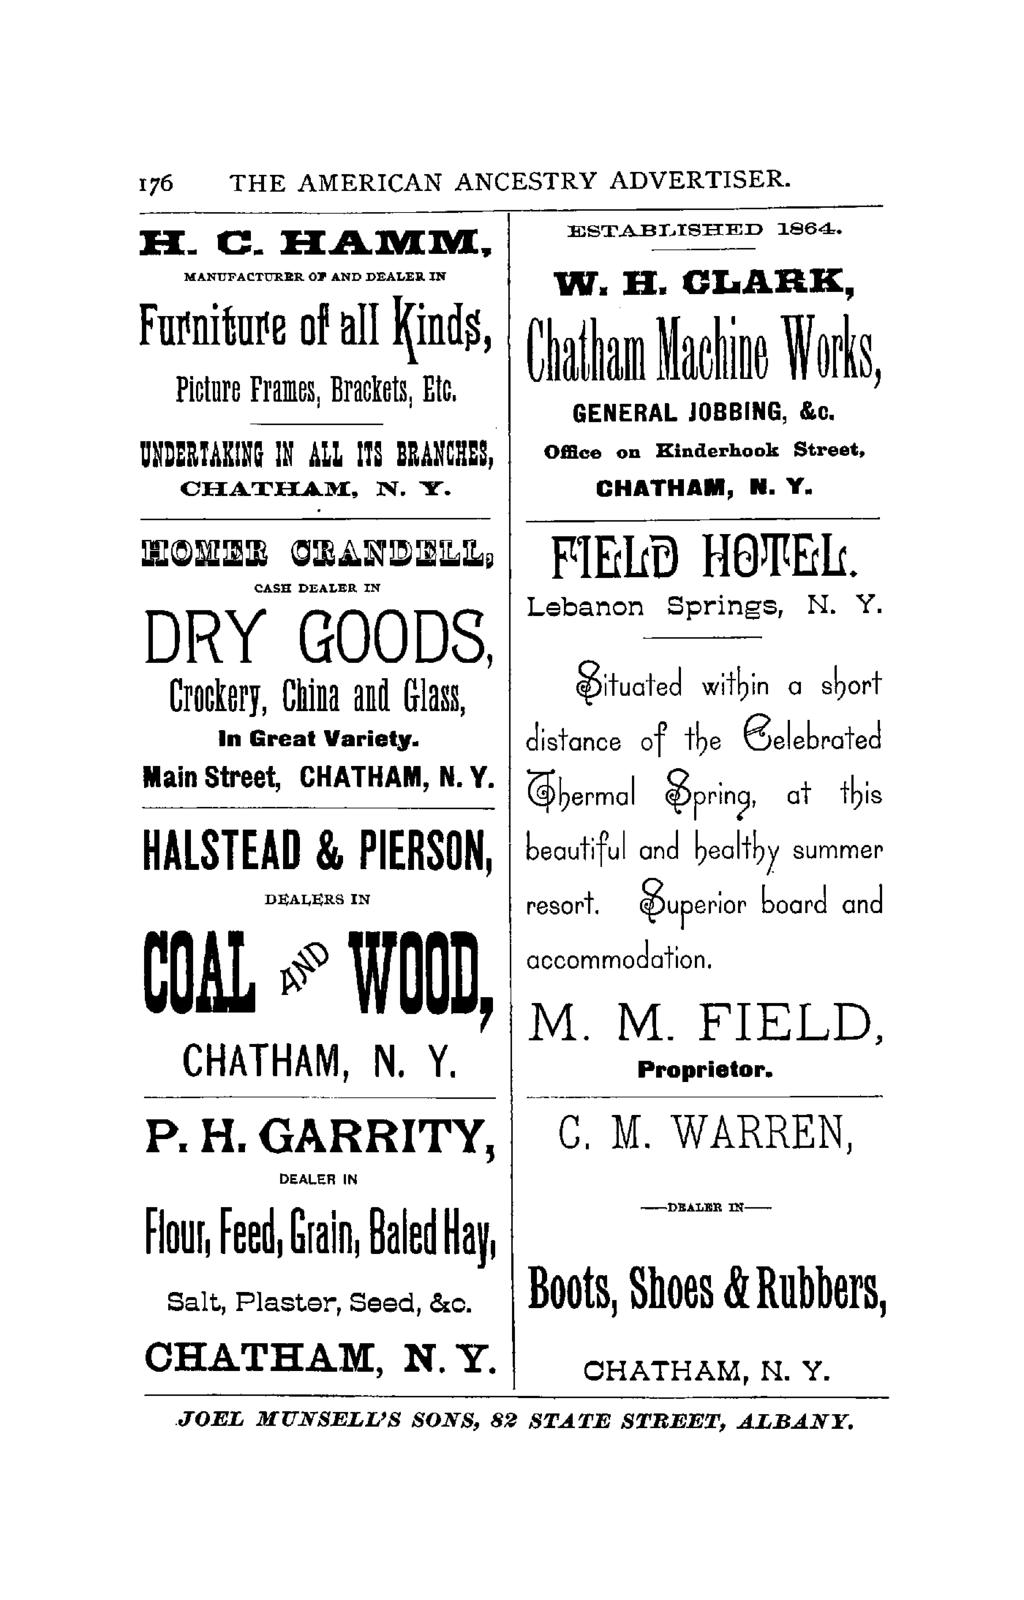 176 THE AMERICAN ANCESTRY ADVERTISER. H. C.HAMM, MANUFACTURER 011' AND DEALER IN Fn~nitn~e of all ~ind~, Picture Frames, Brackets, Etc. UNDERTAKING IN ALL ITS BRANCHES, ESTABI,ISHED 1864. w. R.